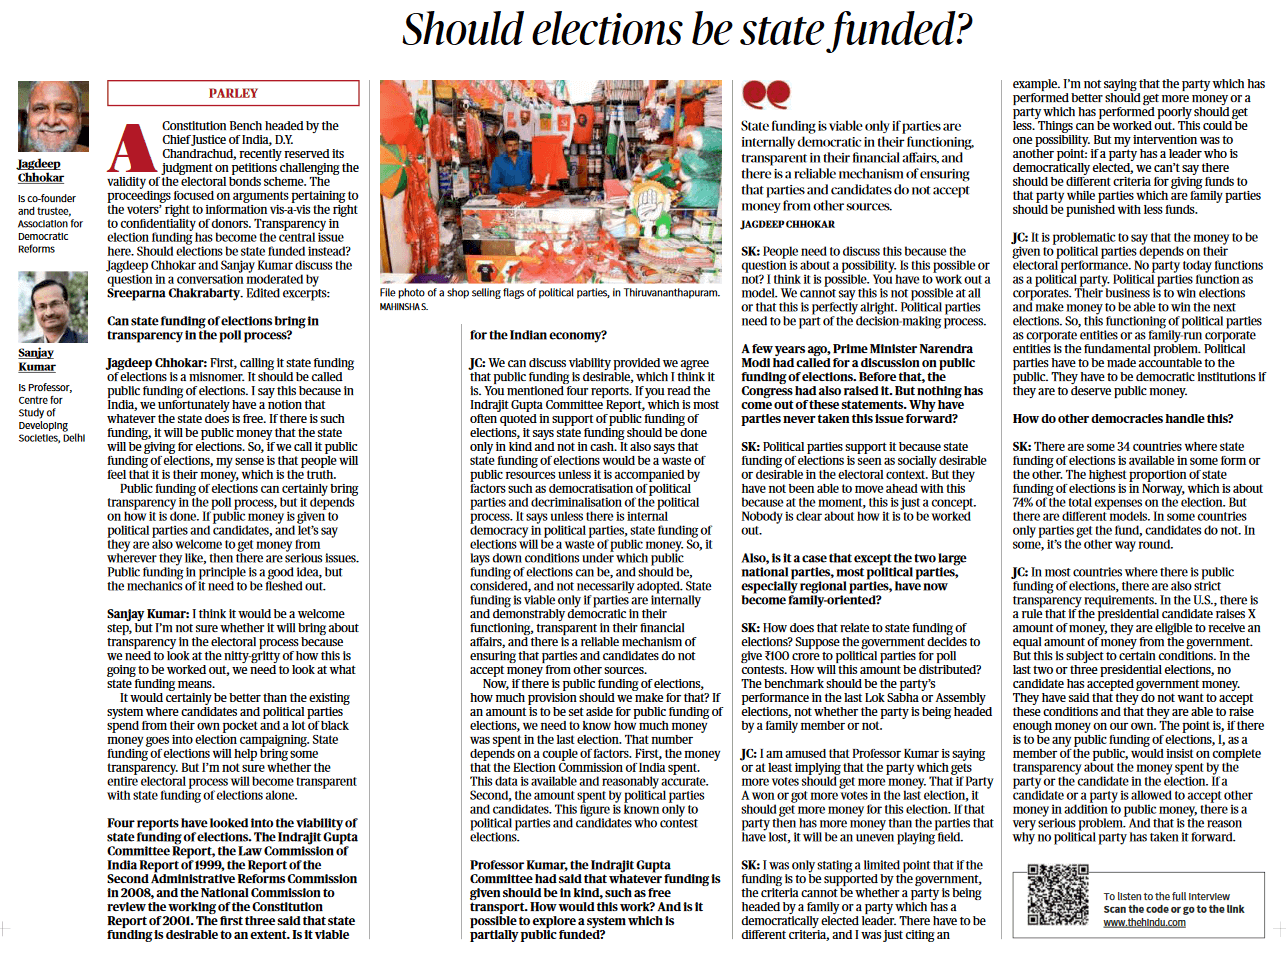 Should elections be state funded? - Page No.9, GS 2